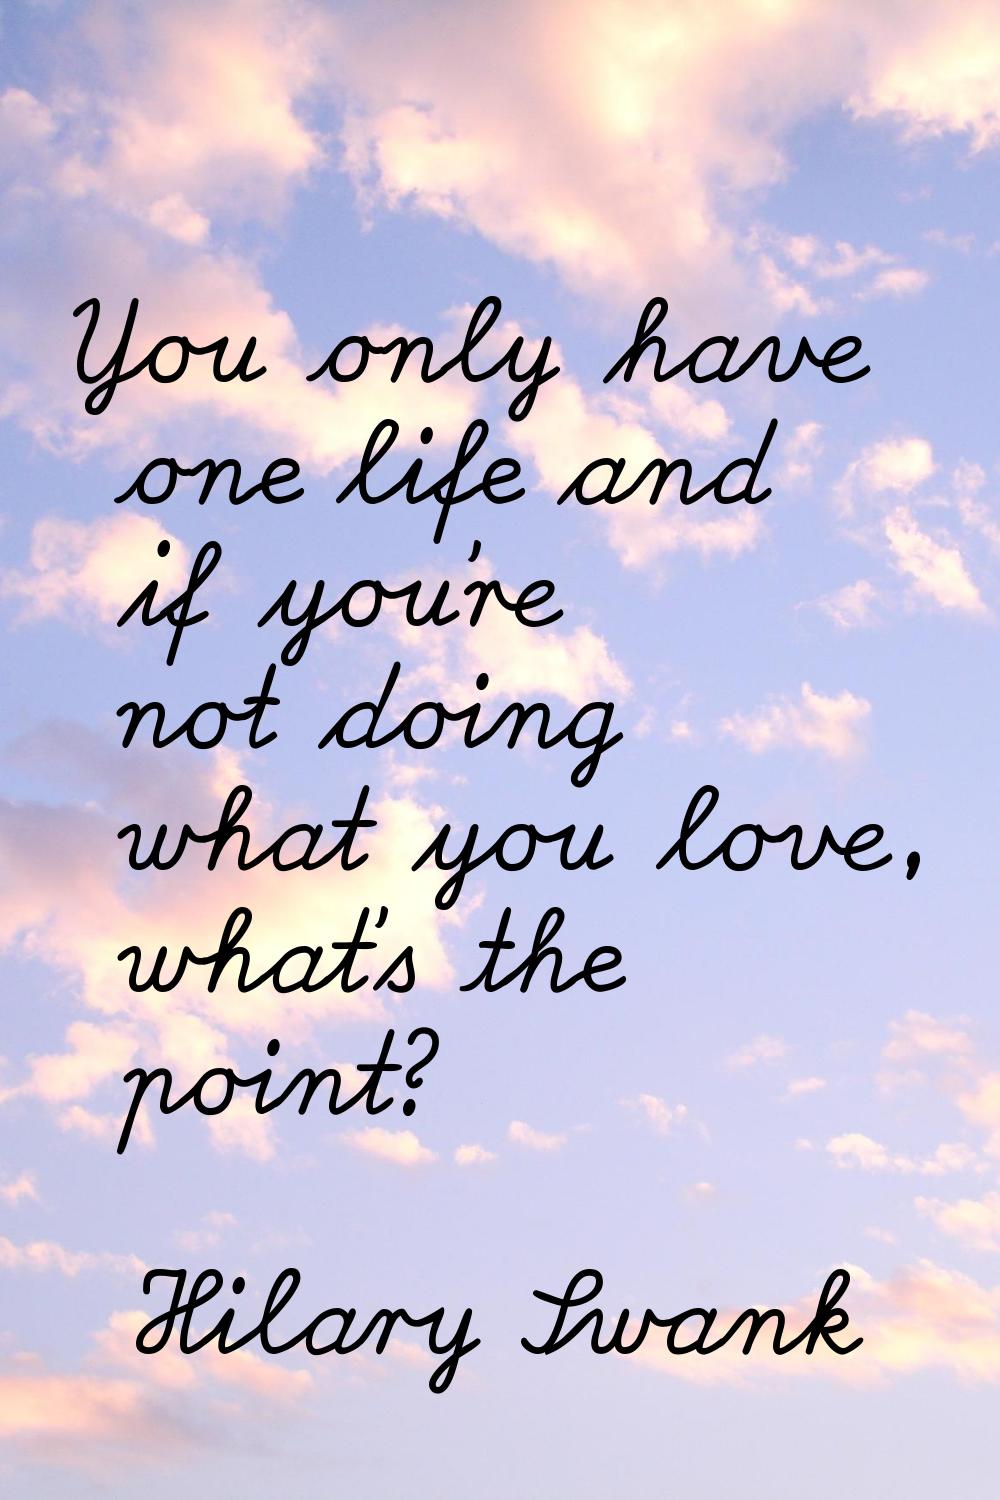 You only have one life and if you're not doing what you love, what's the point?